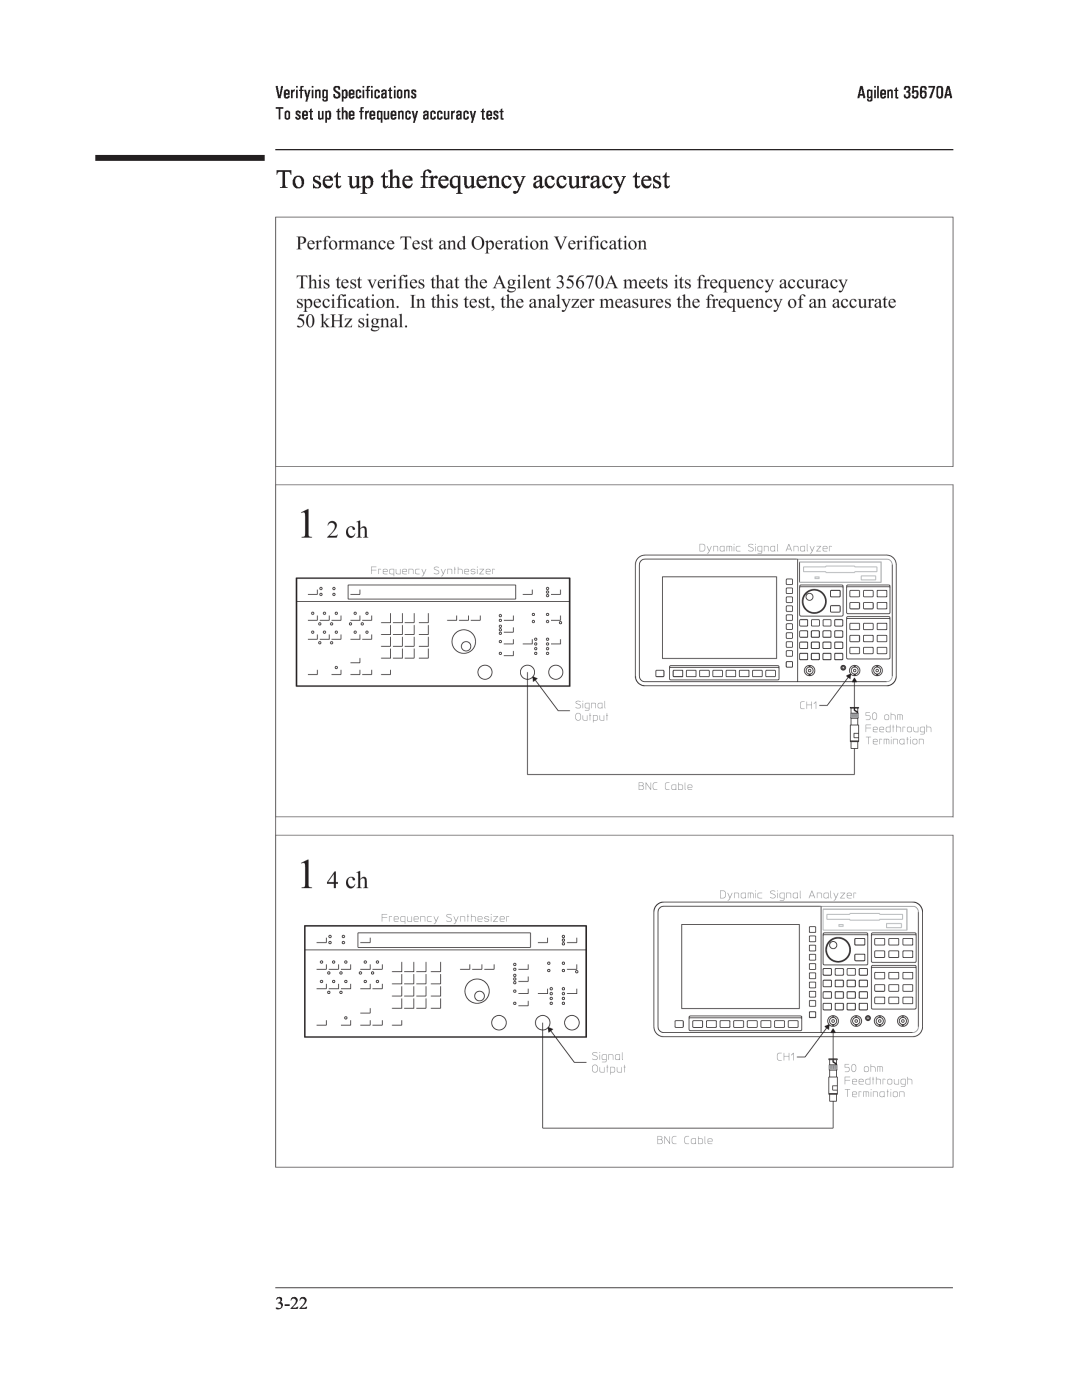 Agilent Technologies 35670-90066 manual To set up the frequency accuracy test, 1 2 ch, 1 4 ch, Verifying Specifications 